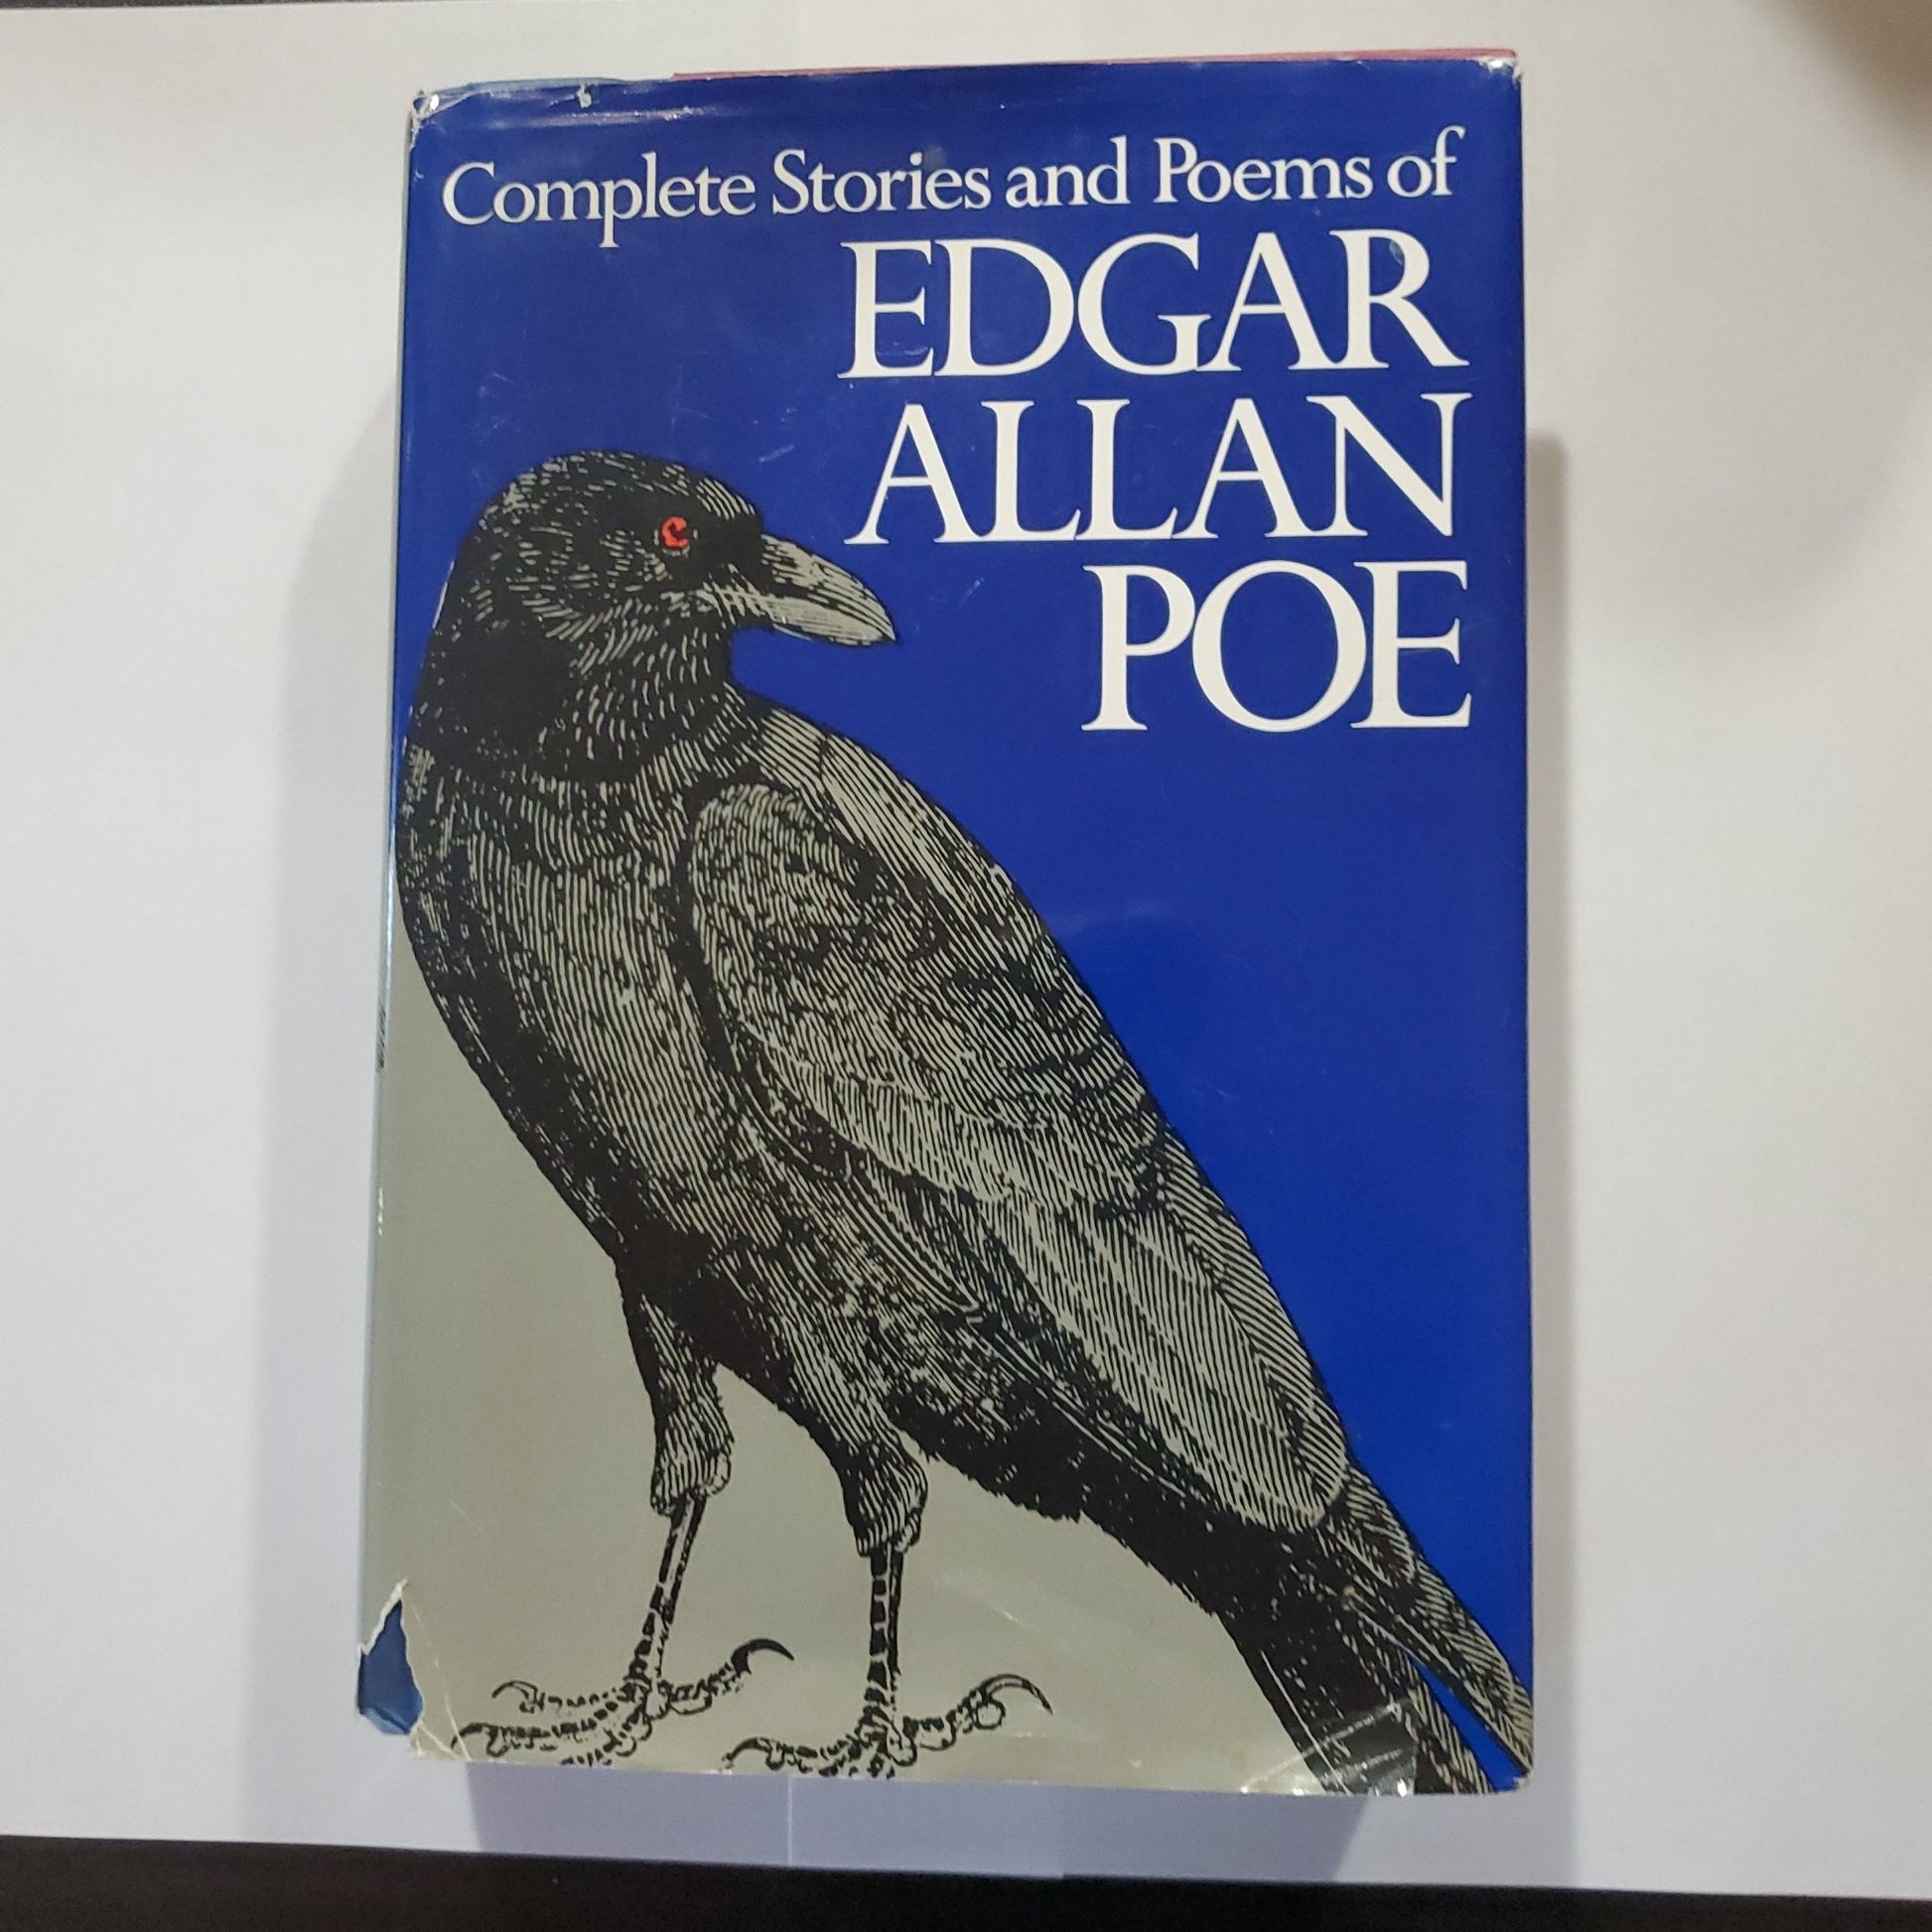 Complete Stories and Poems of Edgar Allan Poe - [ash-ling] Booksellers